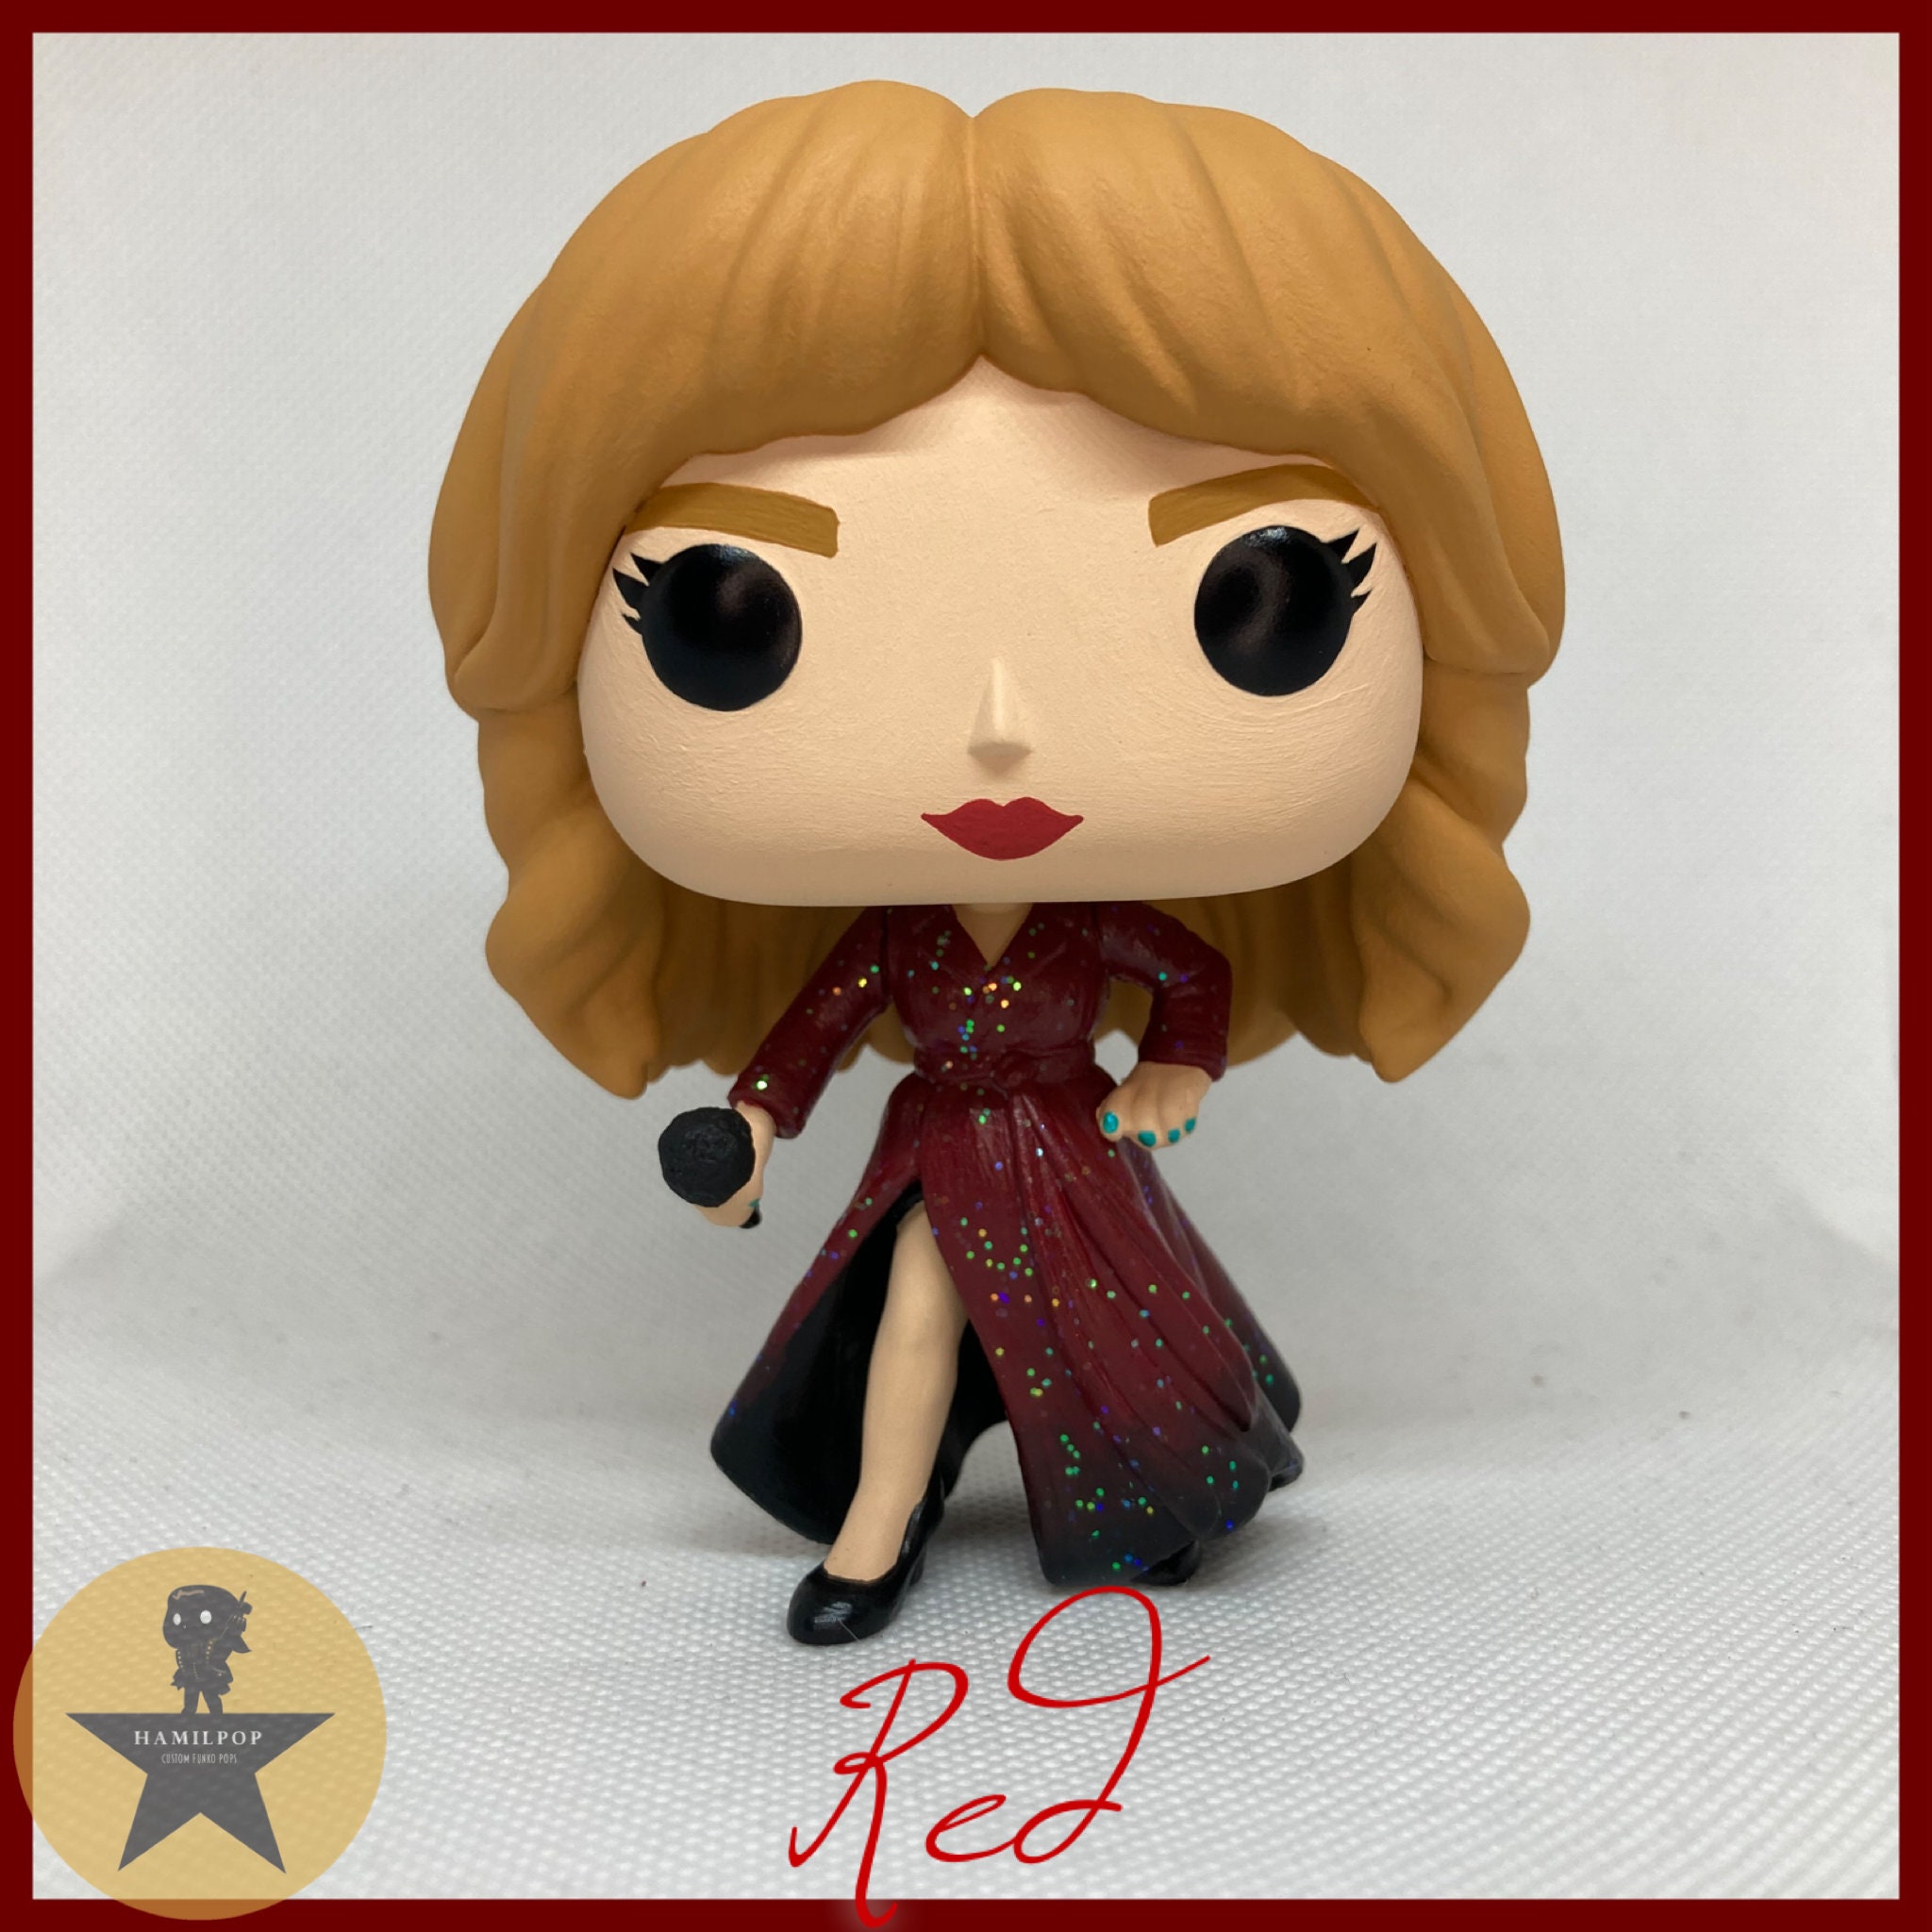 Taylor Thing on Instagram: Taylor Swift as the Eras Tour Funko pops (from  Al, NOT REAL 🚨) a thread: ➡️ Credit to @/spideyvernkook, @/alltoodilf  @/celestialdevils @/JARODCORE @/thefallofroman @/greatwarlover  @/enchantedstann @/kookzcore